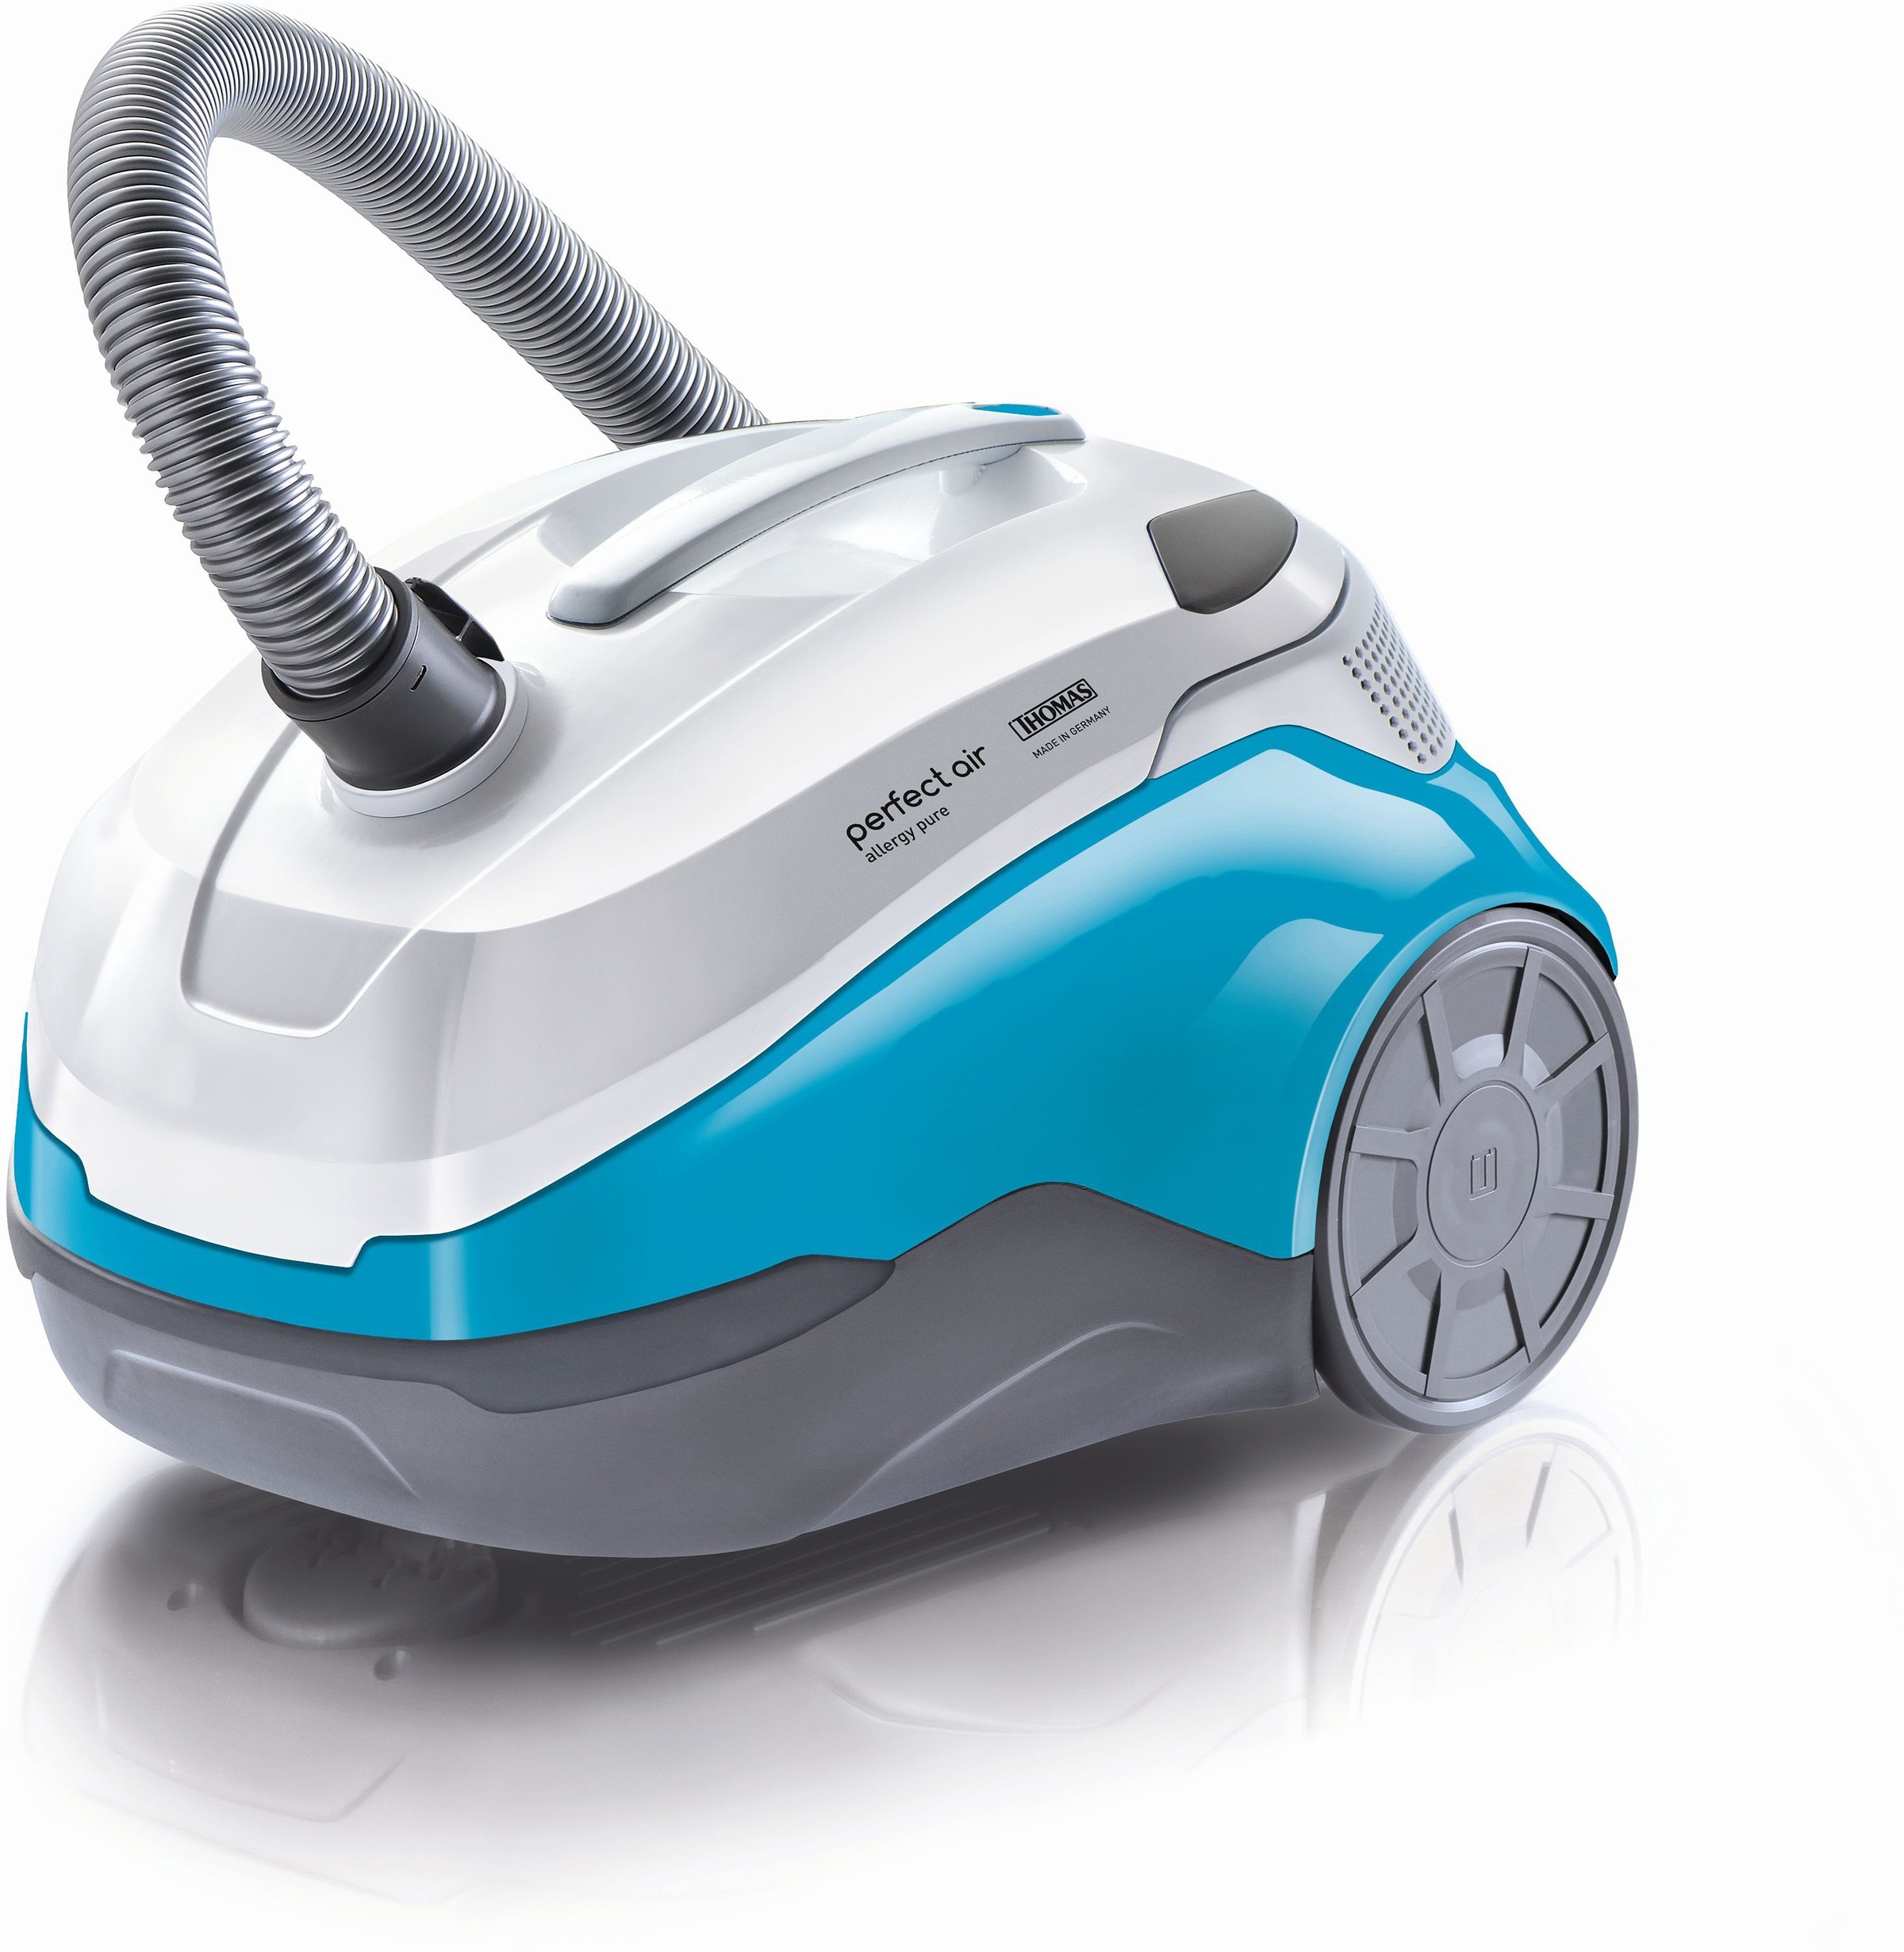 Thomas Wasserfiltersauger "perfect air allergy pure", 1700 W, beutellos